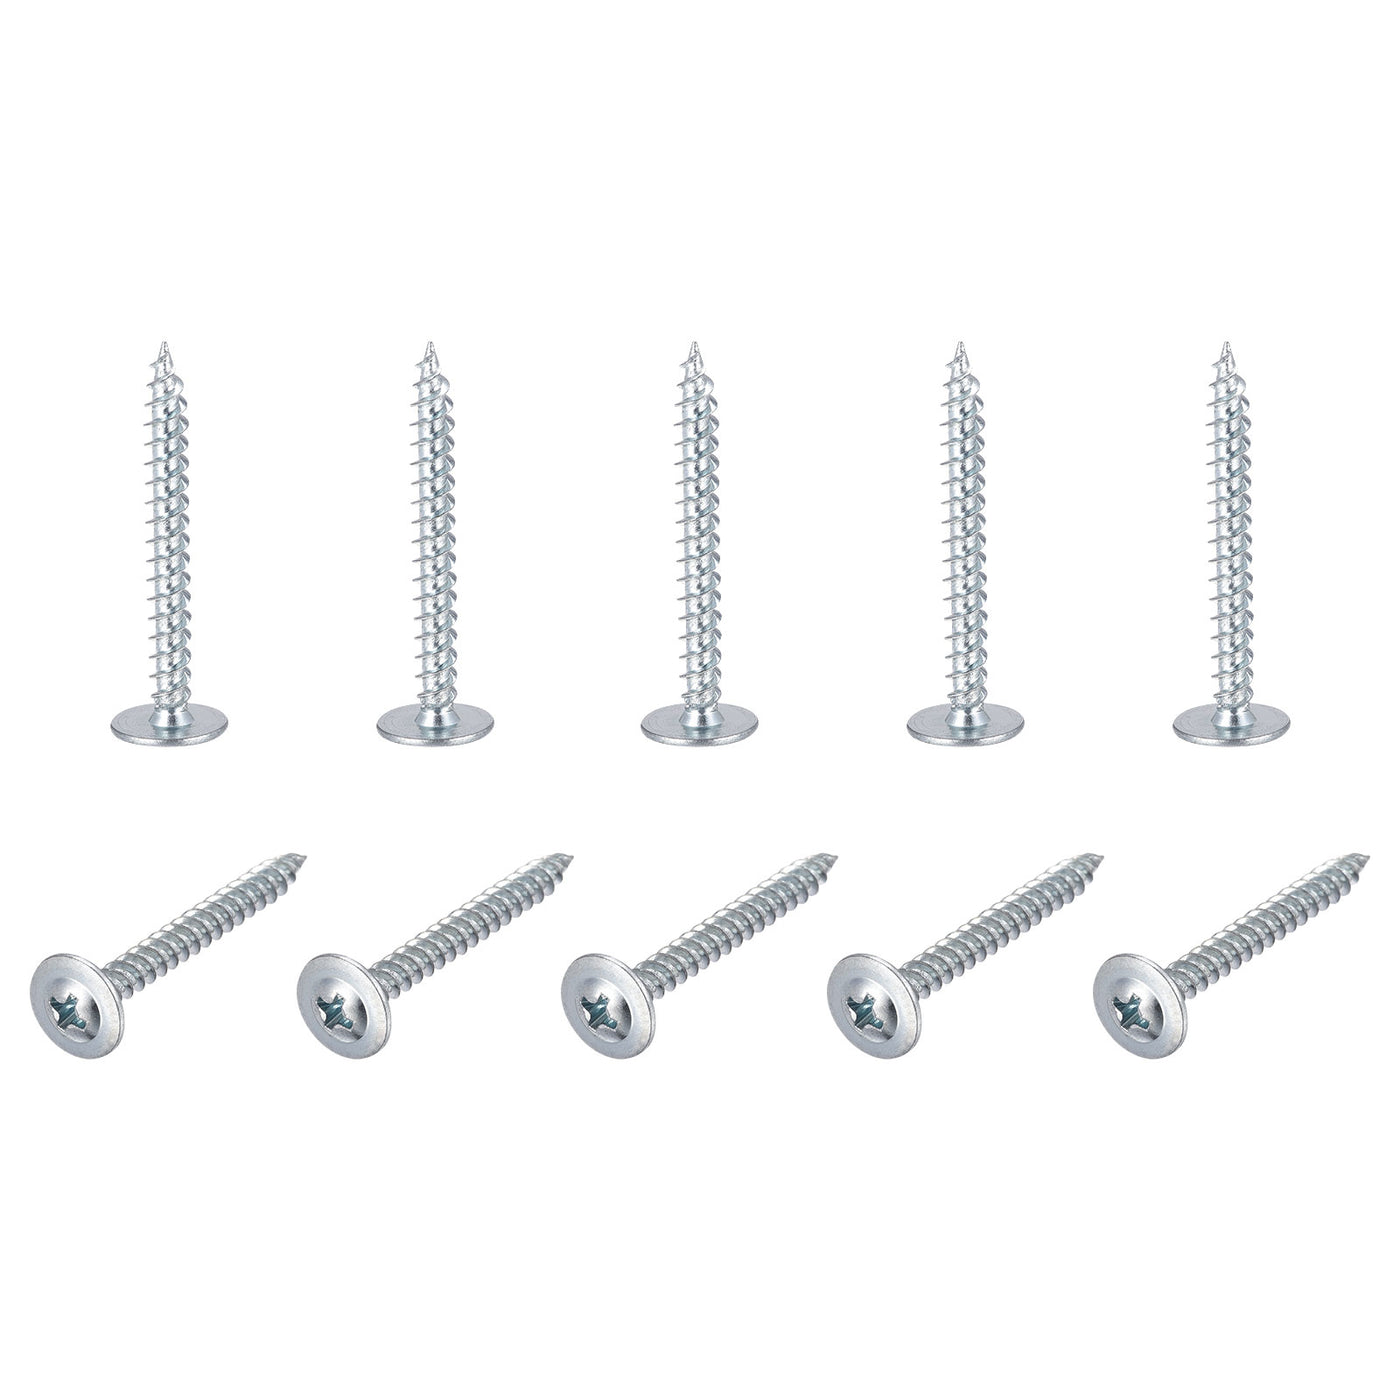 uxcell Uxcell Phillips Head Self Tapping Screws, #8 x 1-1/2" Carbon Steel Wood Sheet Metal Screw 50pcs